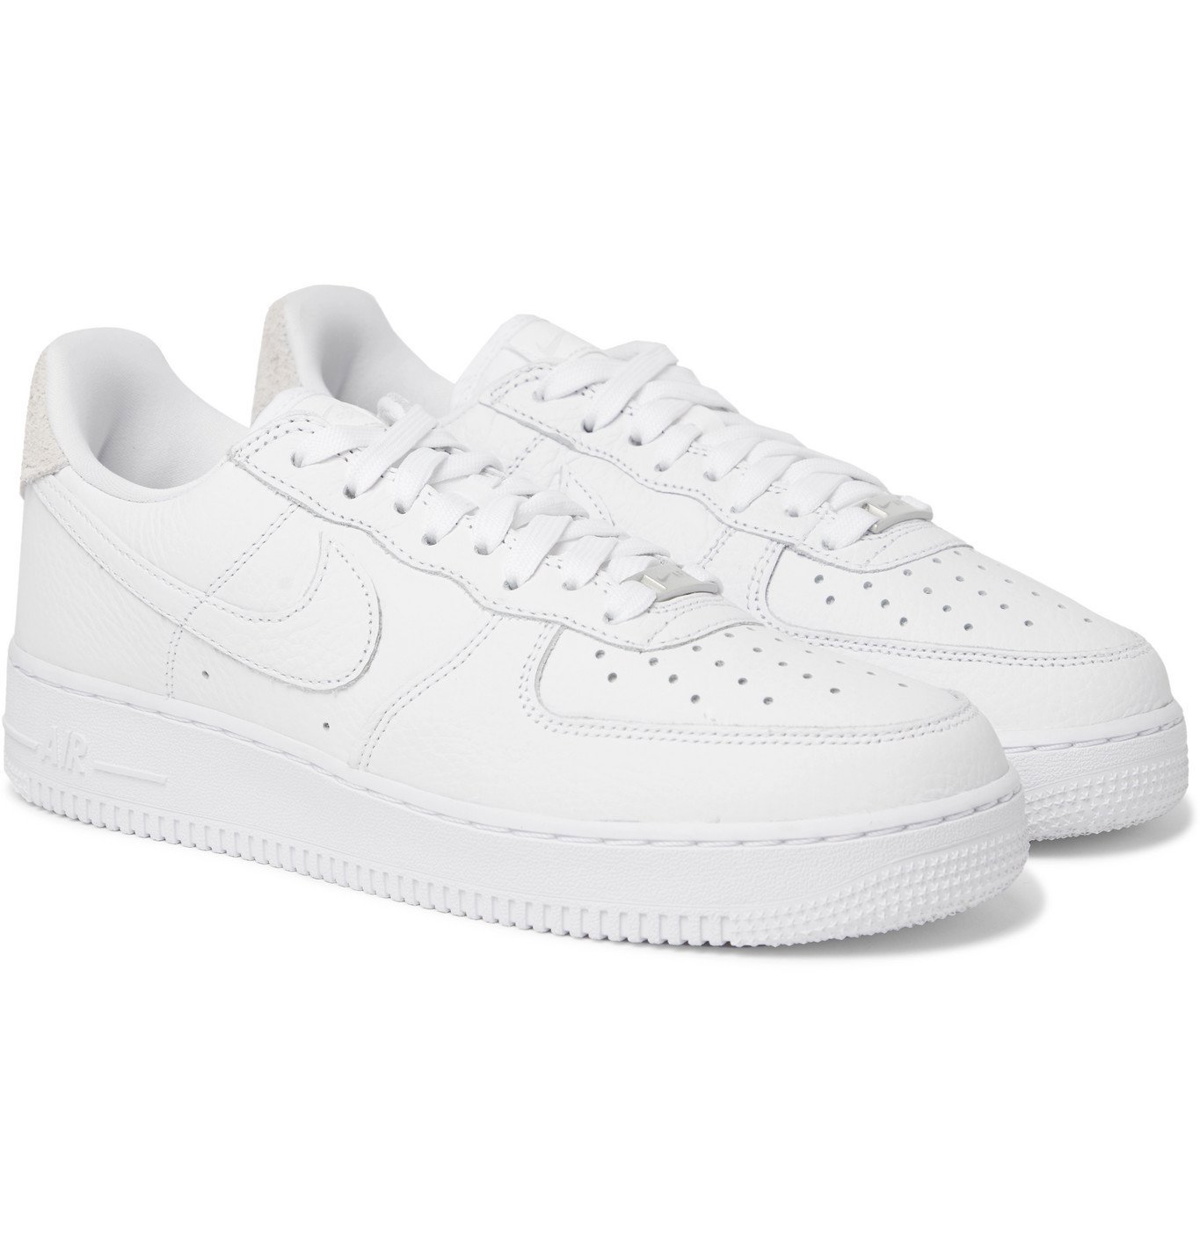 - Air Force 1 '07 Craft Full-Grain Leather and Suede Sneakers - White Nike